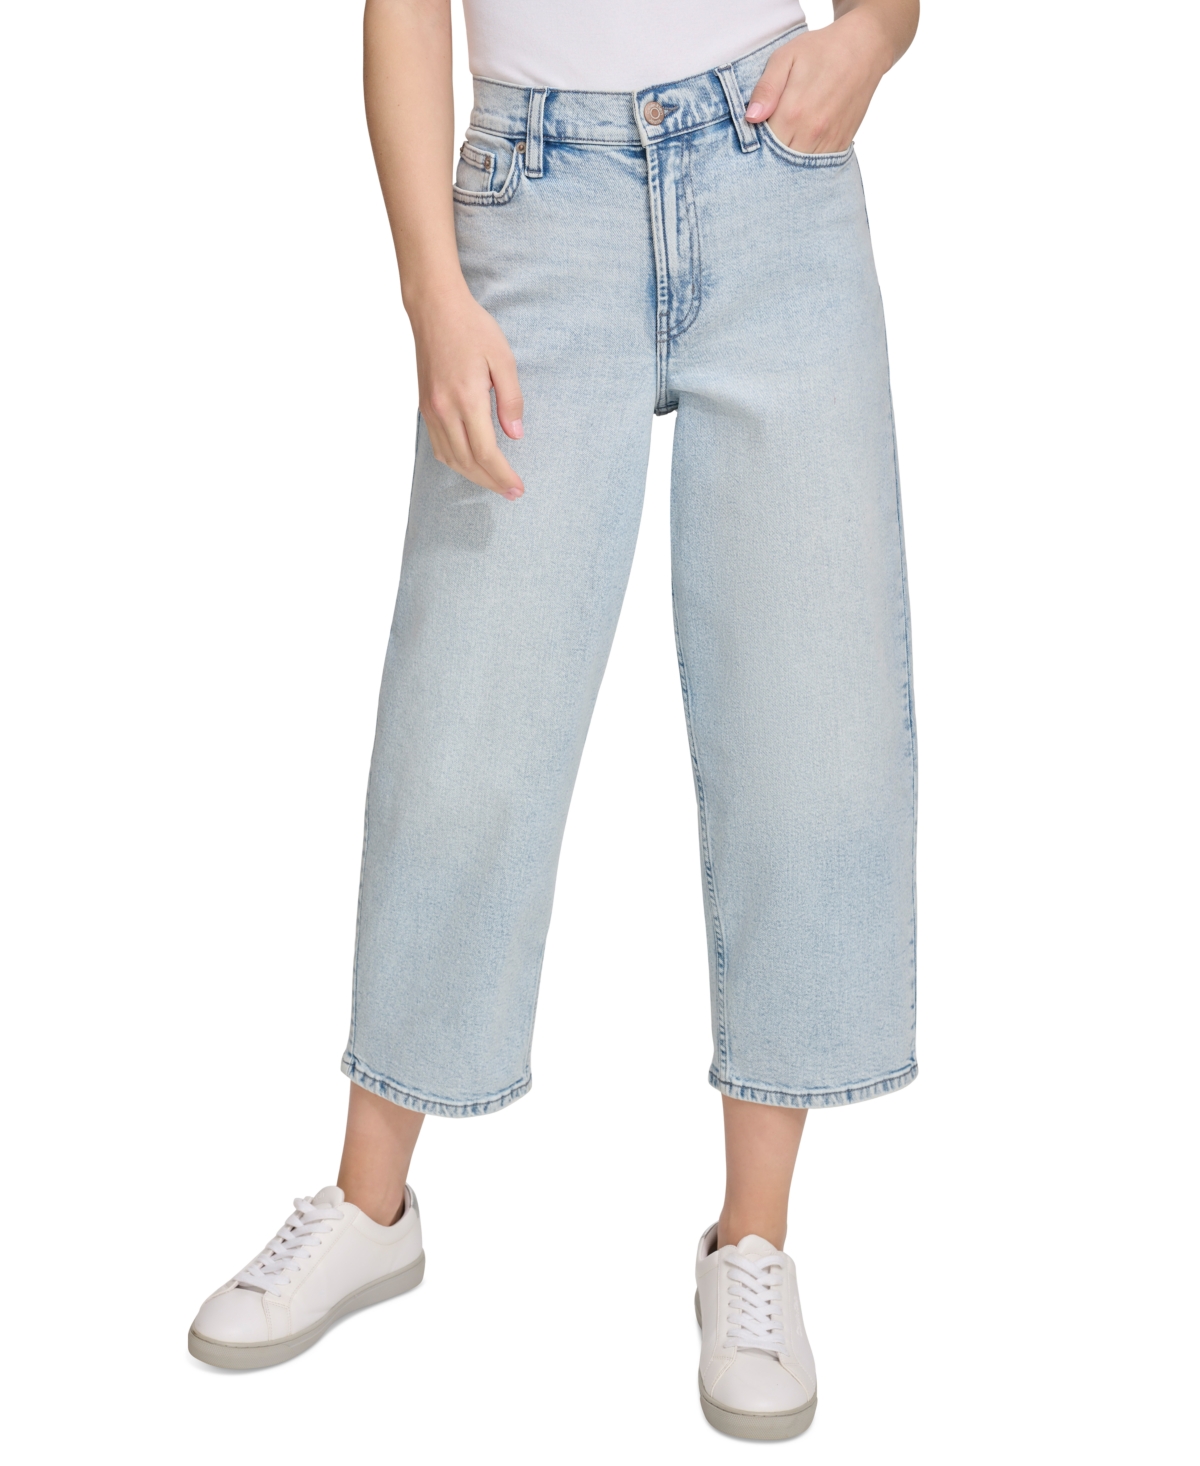 Calvin Klein Jeans Est.1978 Women's '90s-fit High-rise Cropped Denim Jeans In Ryder